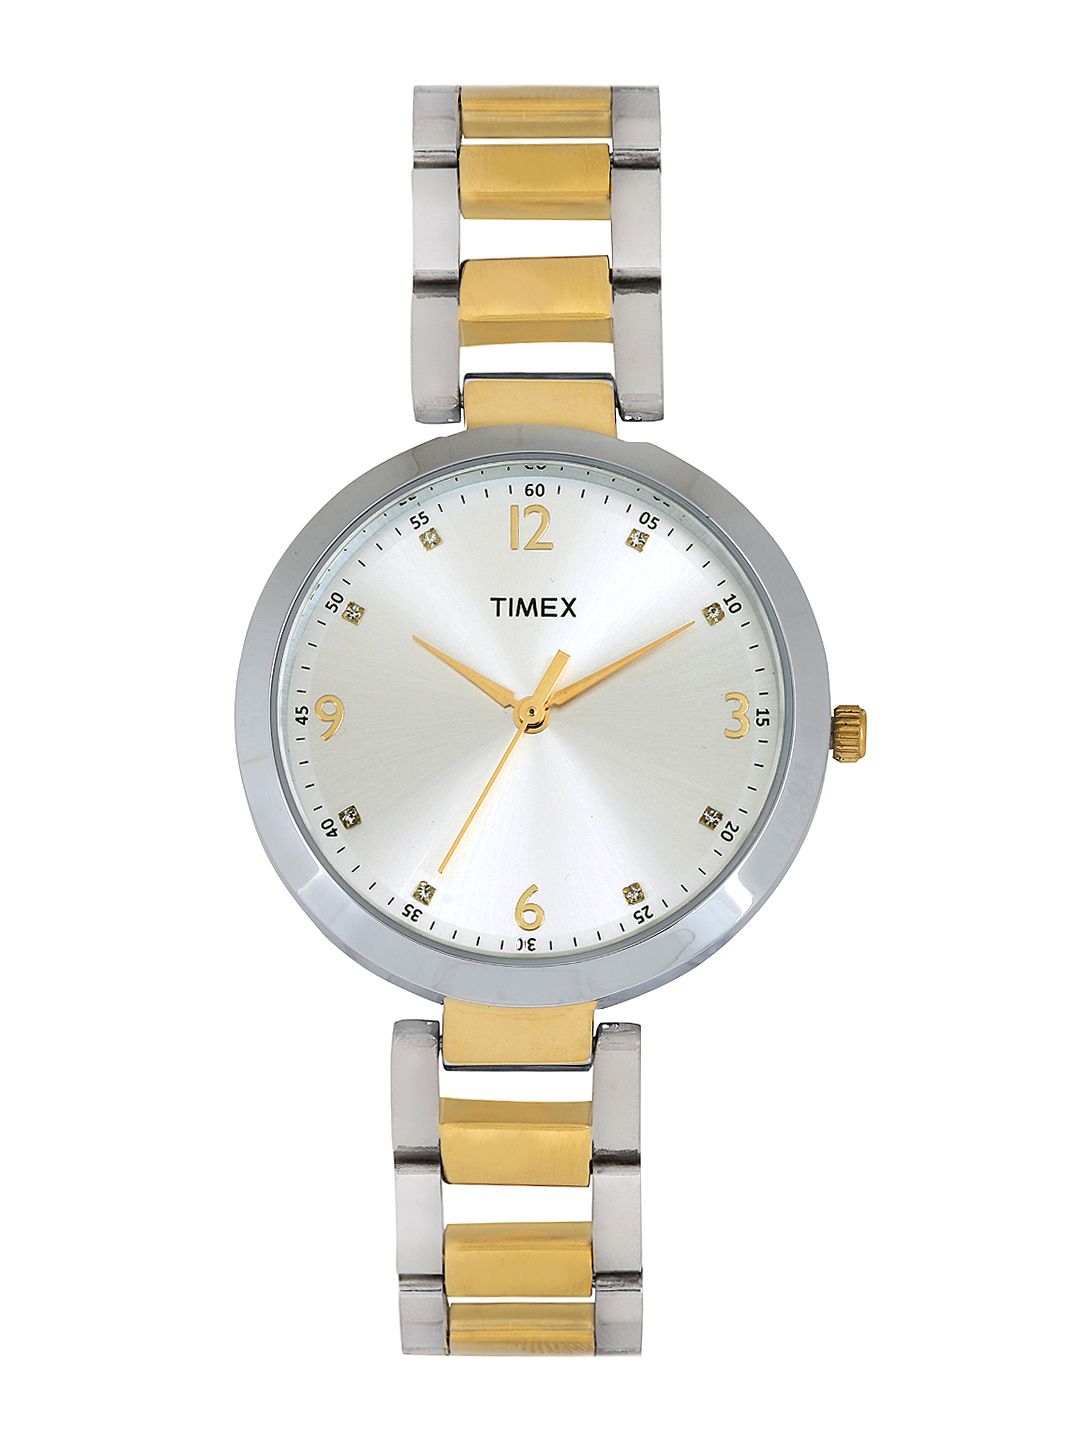 Timex Women Silver-Toned Analogue Watch - TW000X200 Price in India